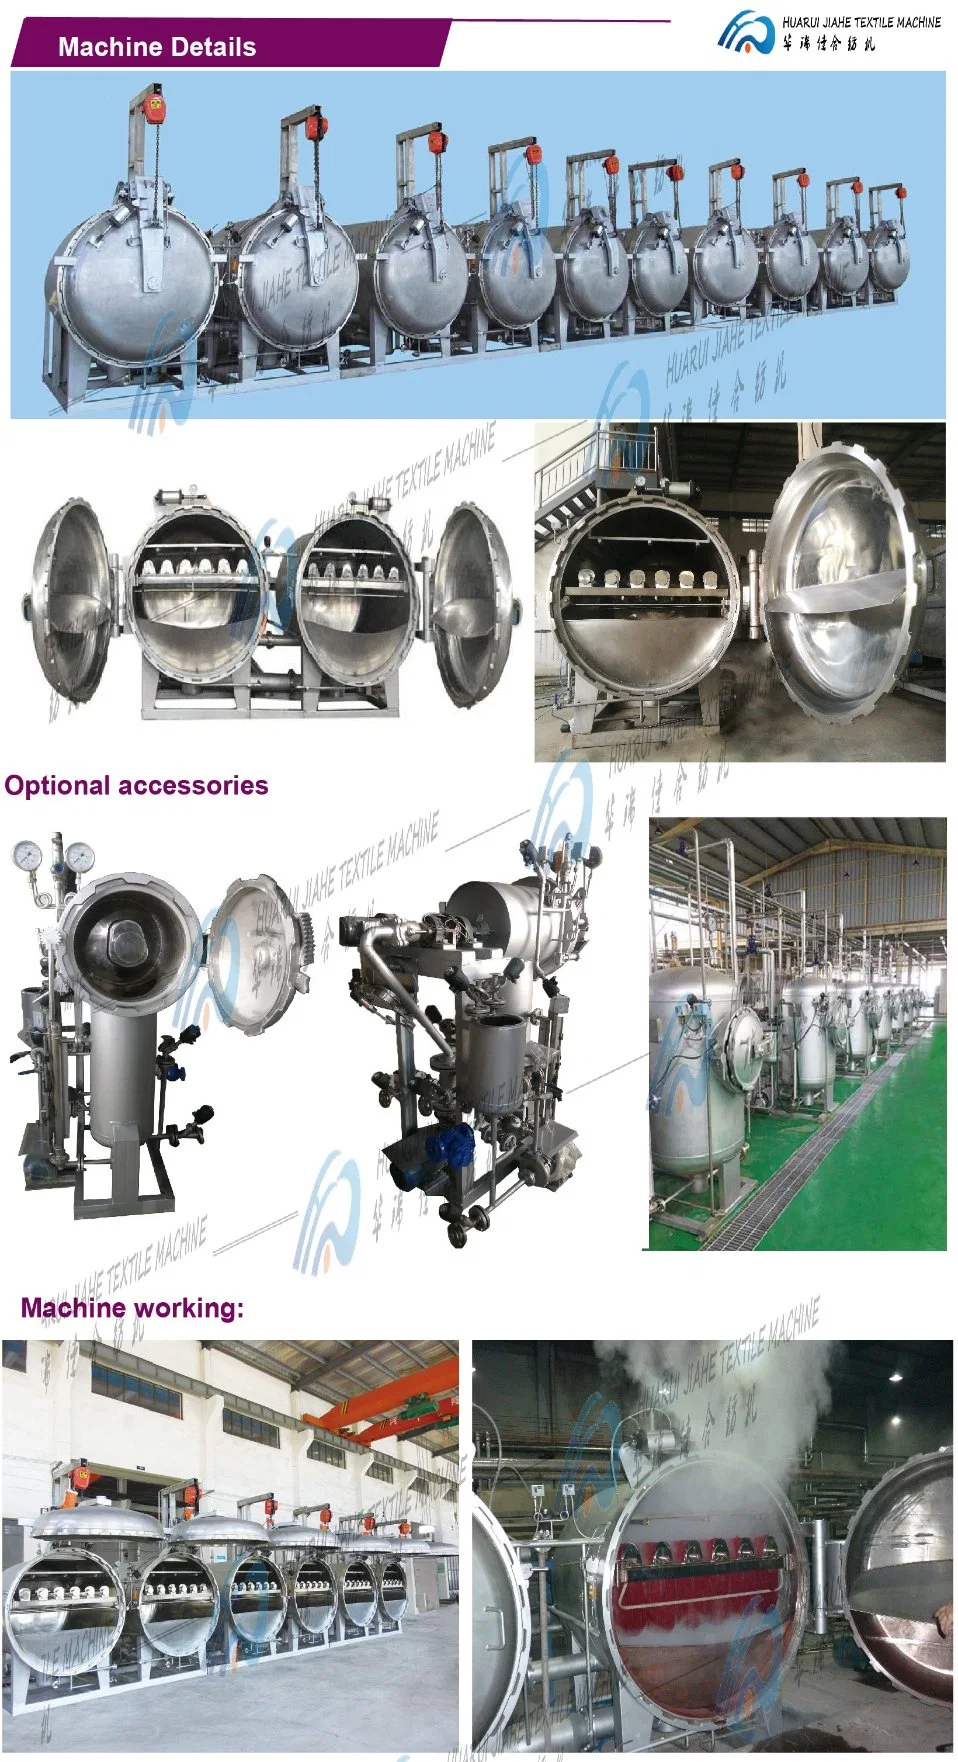 High Temperature Yarn Jet Dyeing Machine with Bleaching, Refining and After-Treatment Functions Hig Quality Dye Machine Clothes Manufacturer Skein Textile Yarn